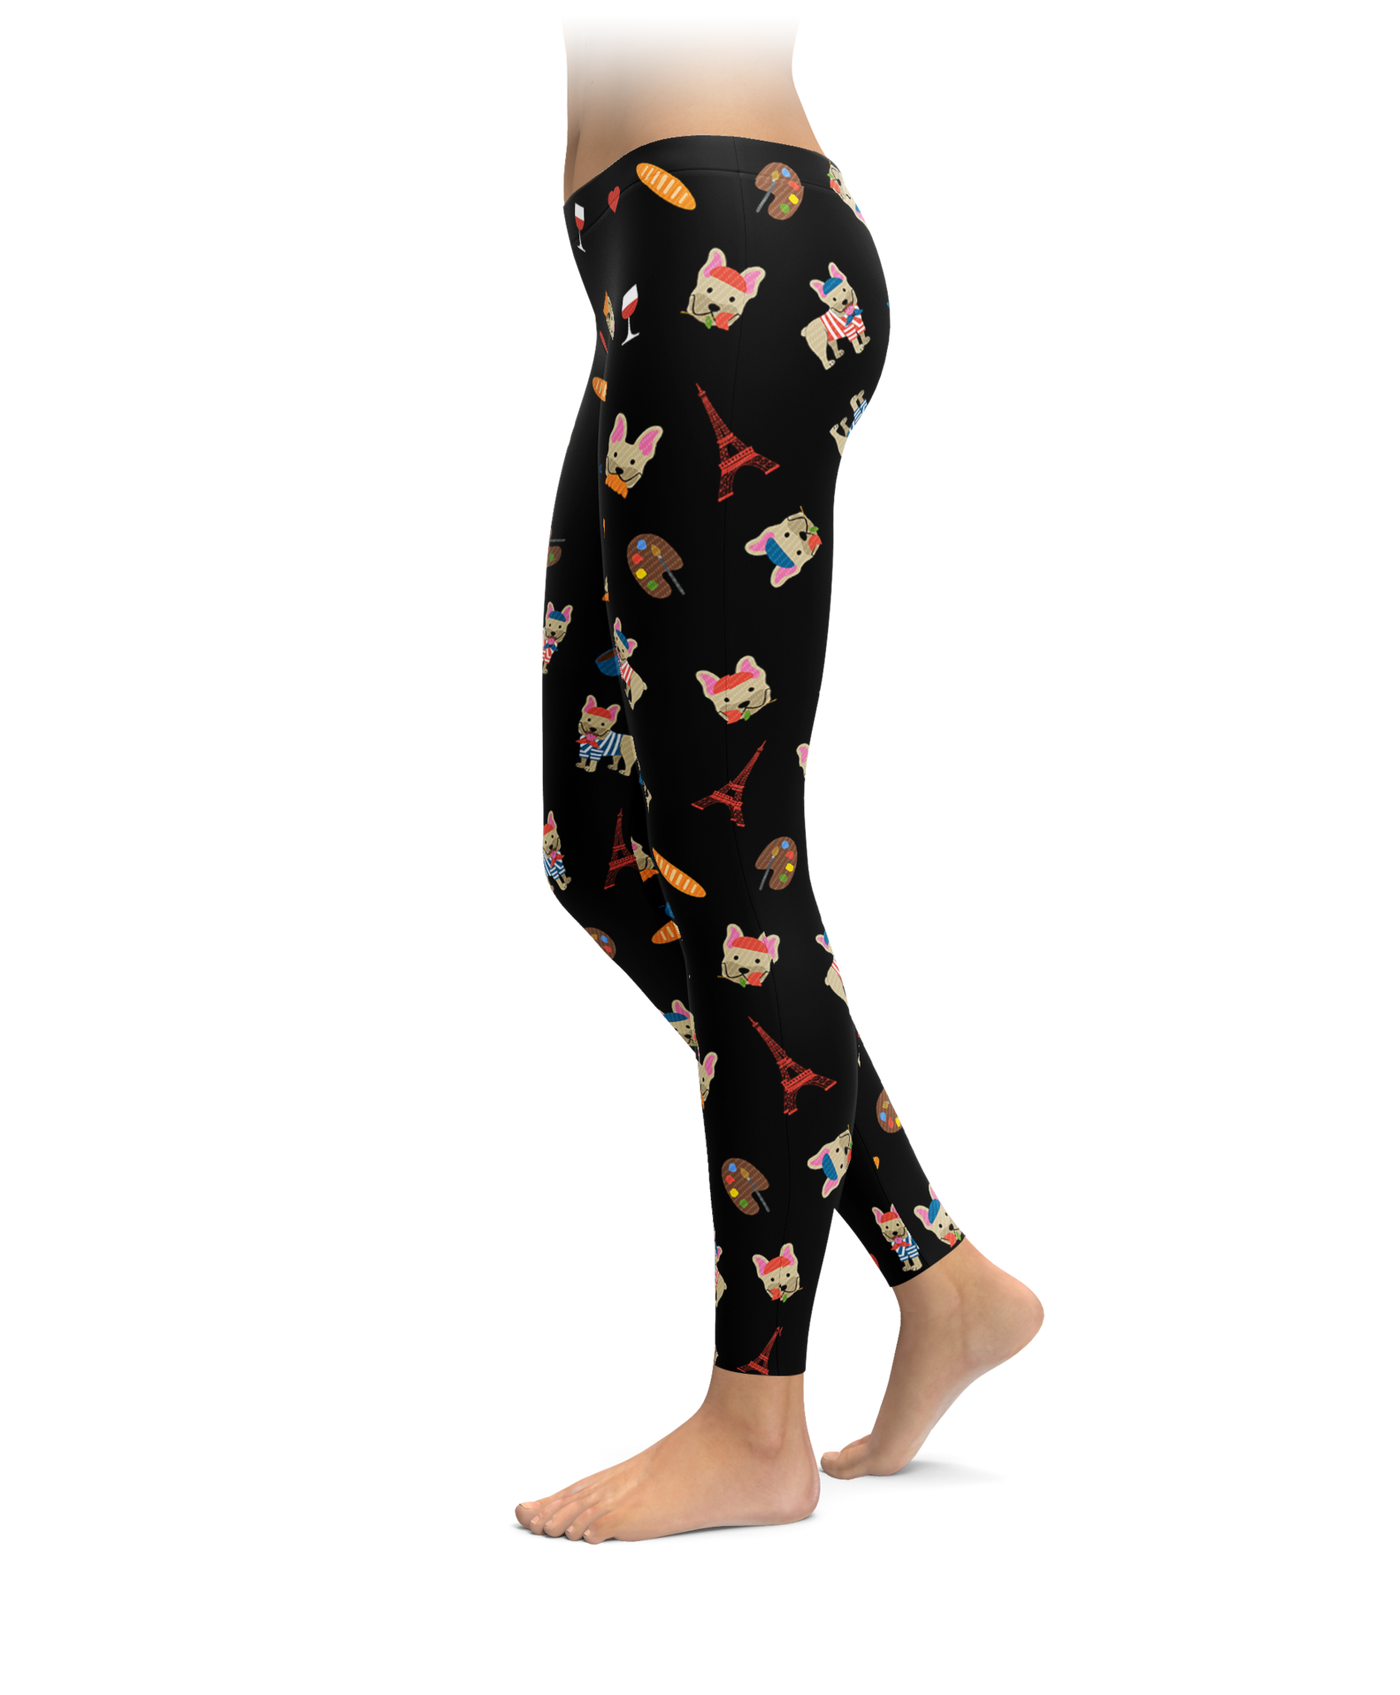 French Frenchie Leggings